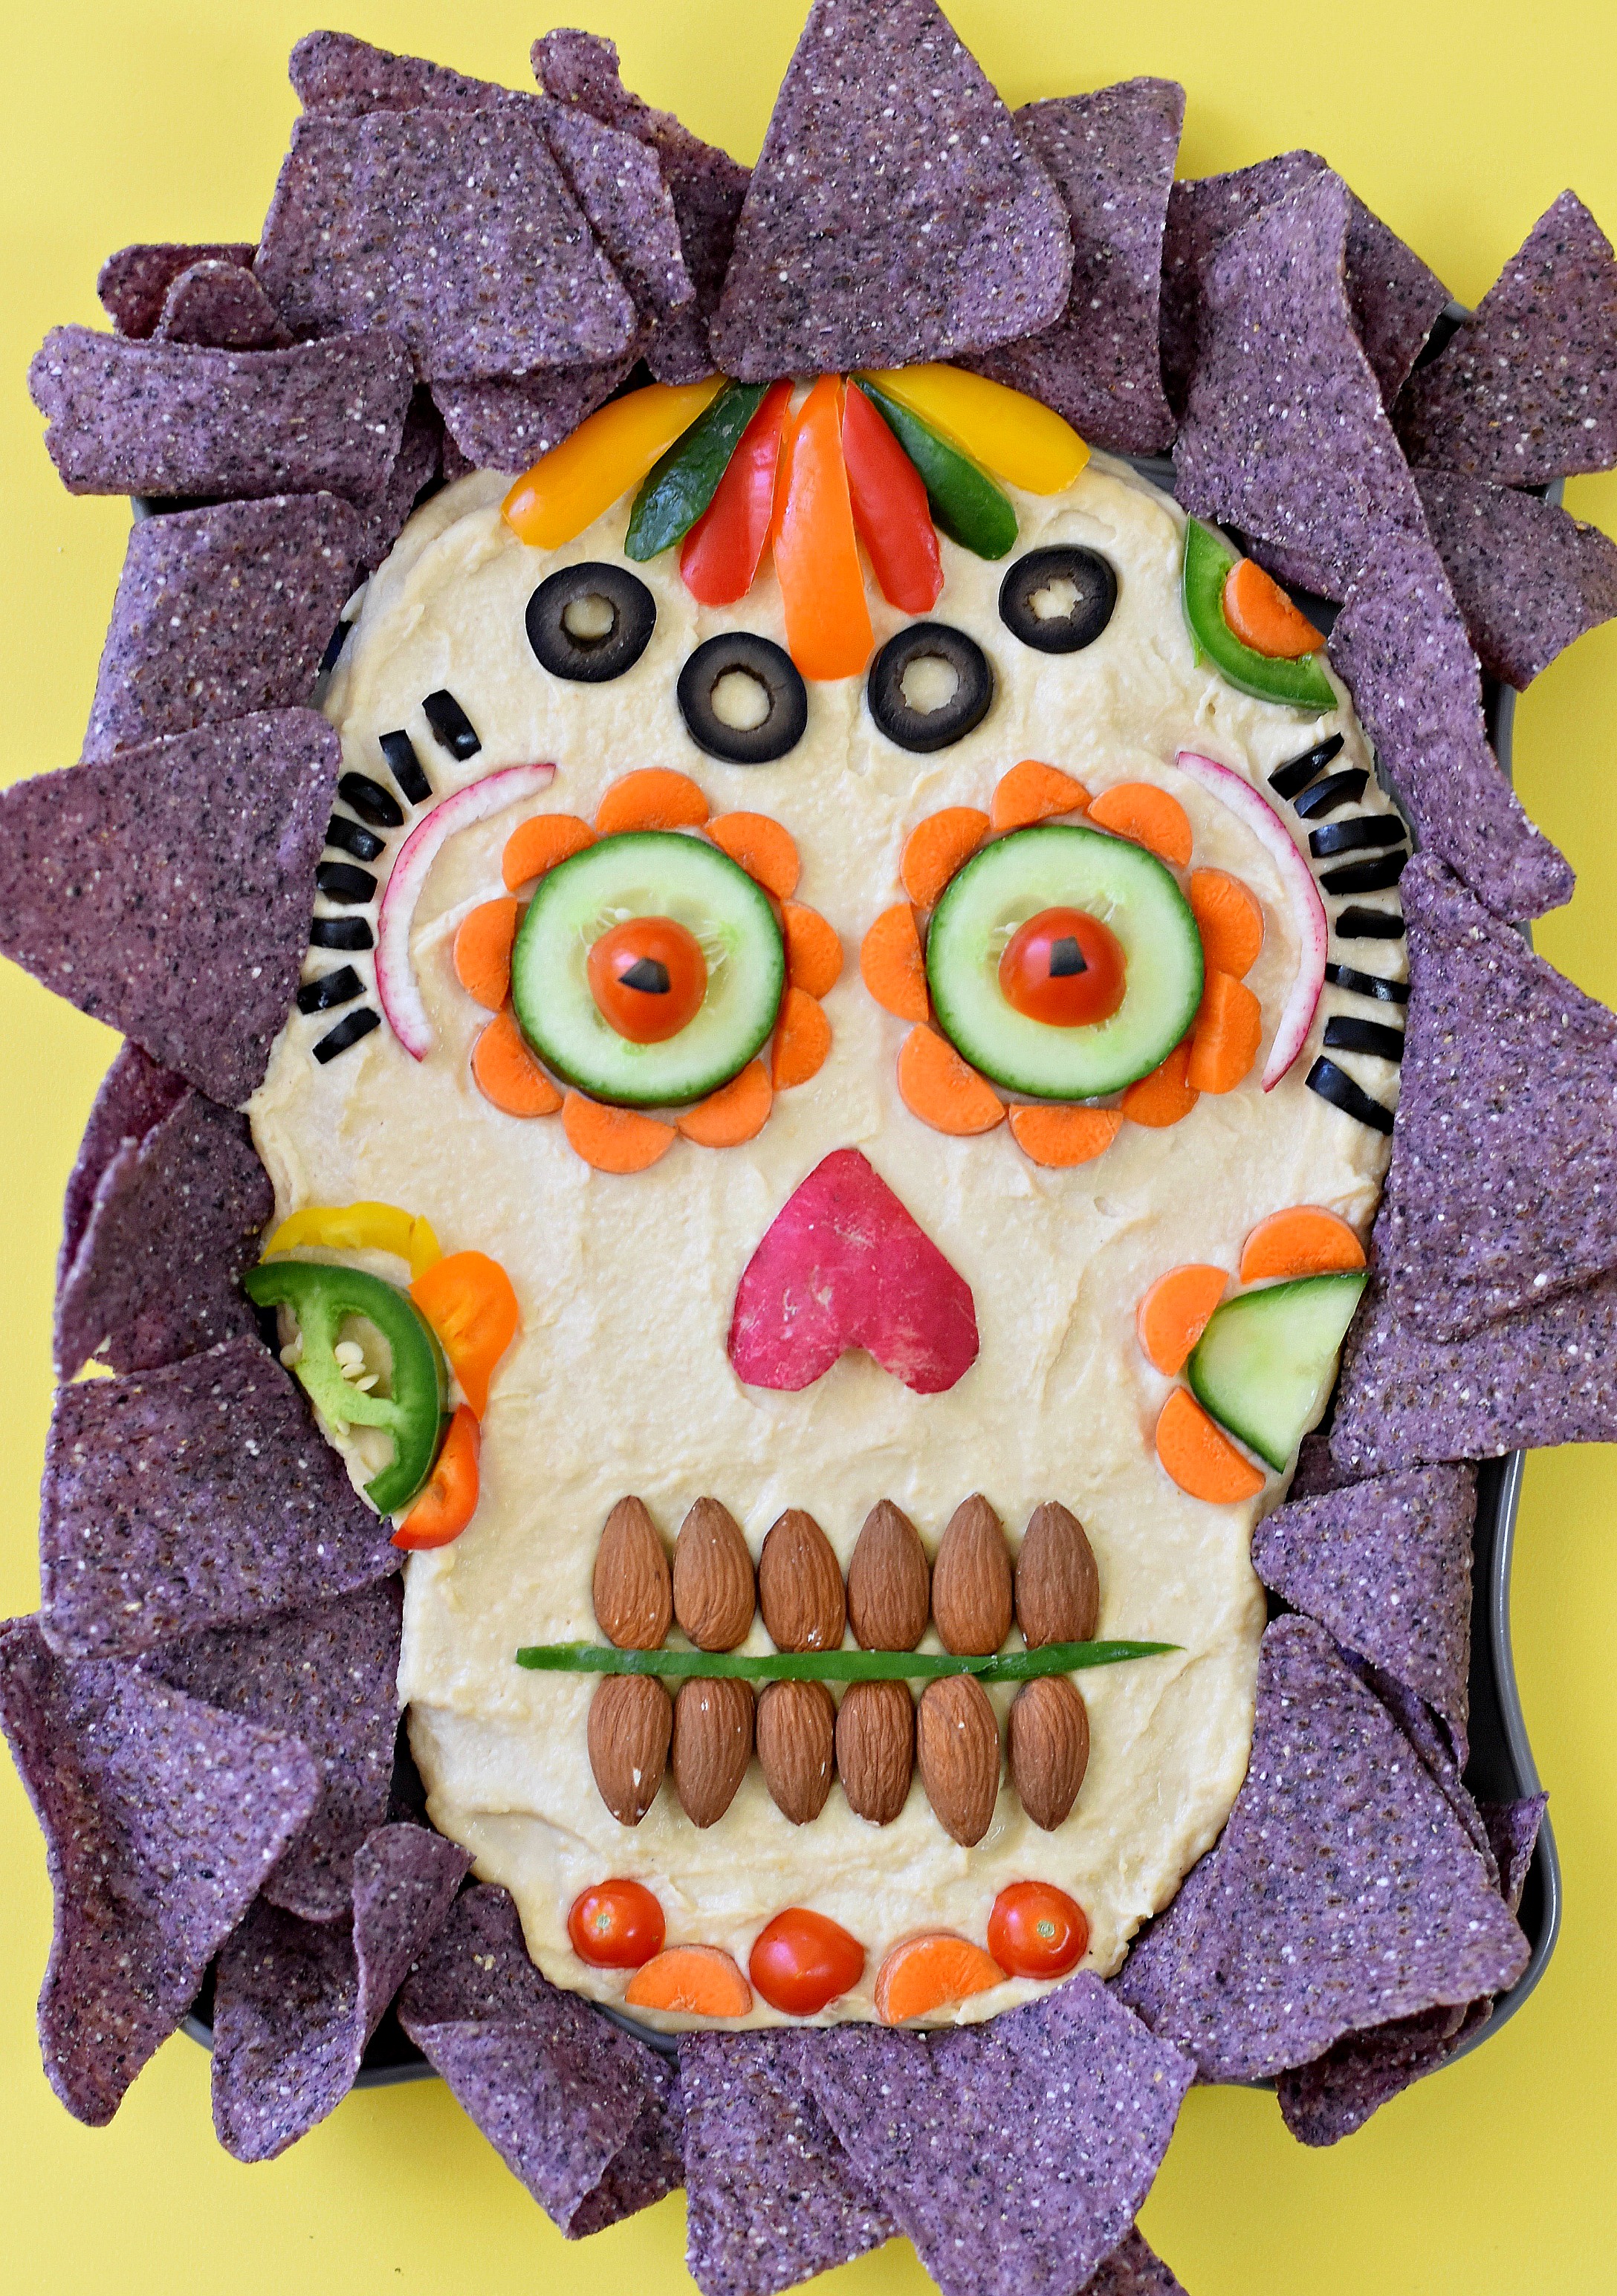  8 fun Halloween appetizers for your holiday party that are guaranteed to impress and awe your guests!